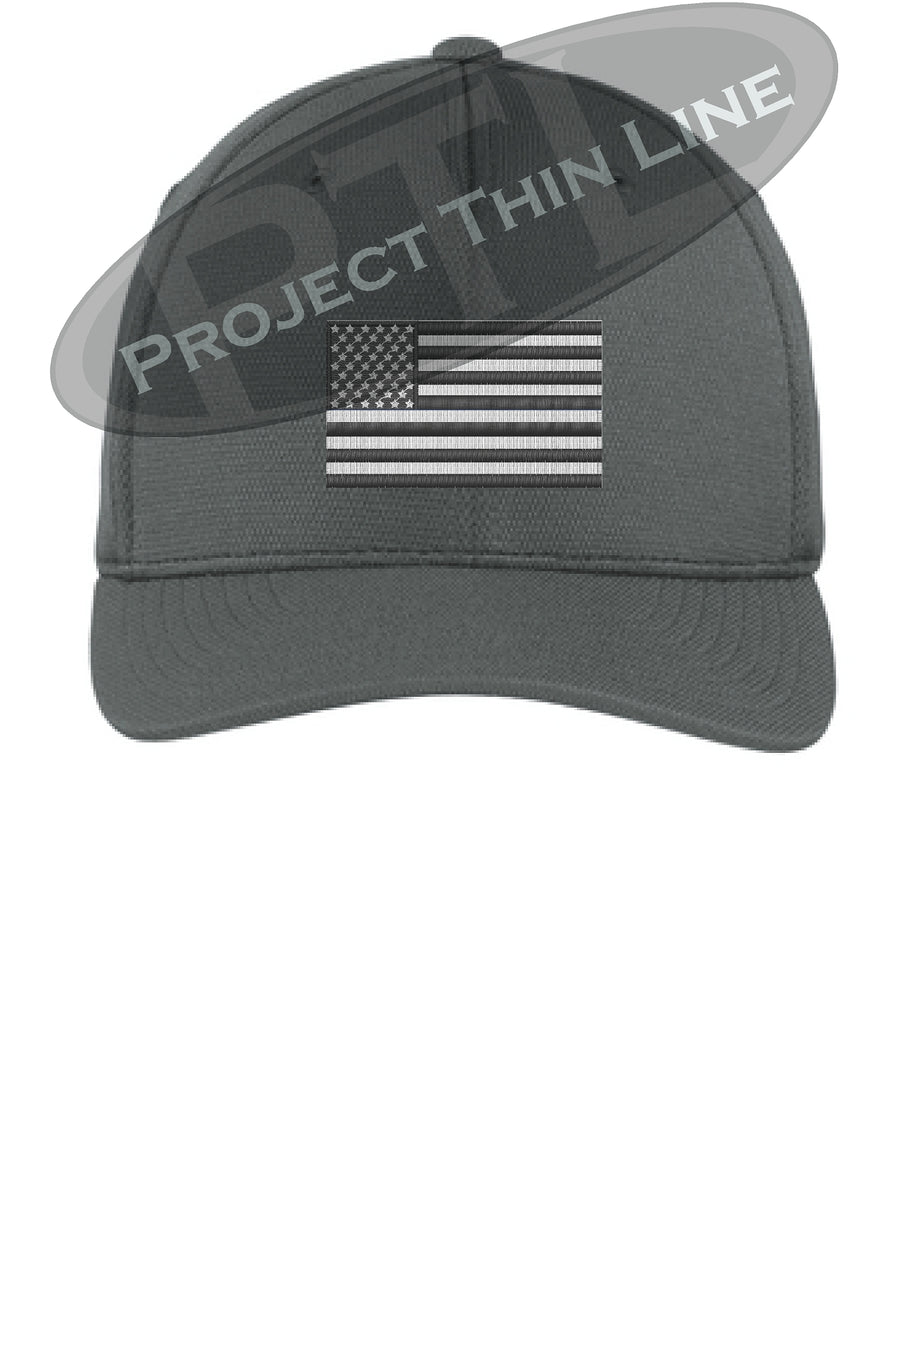 Black Embroidered Tactical / Subdued American Flag Flex Fit Fitted TRUCKER Hat